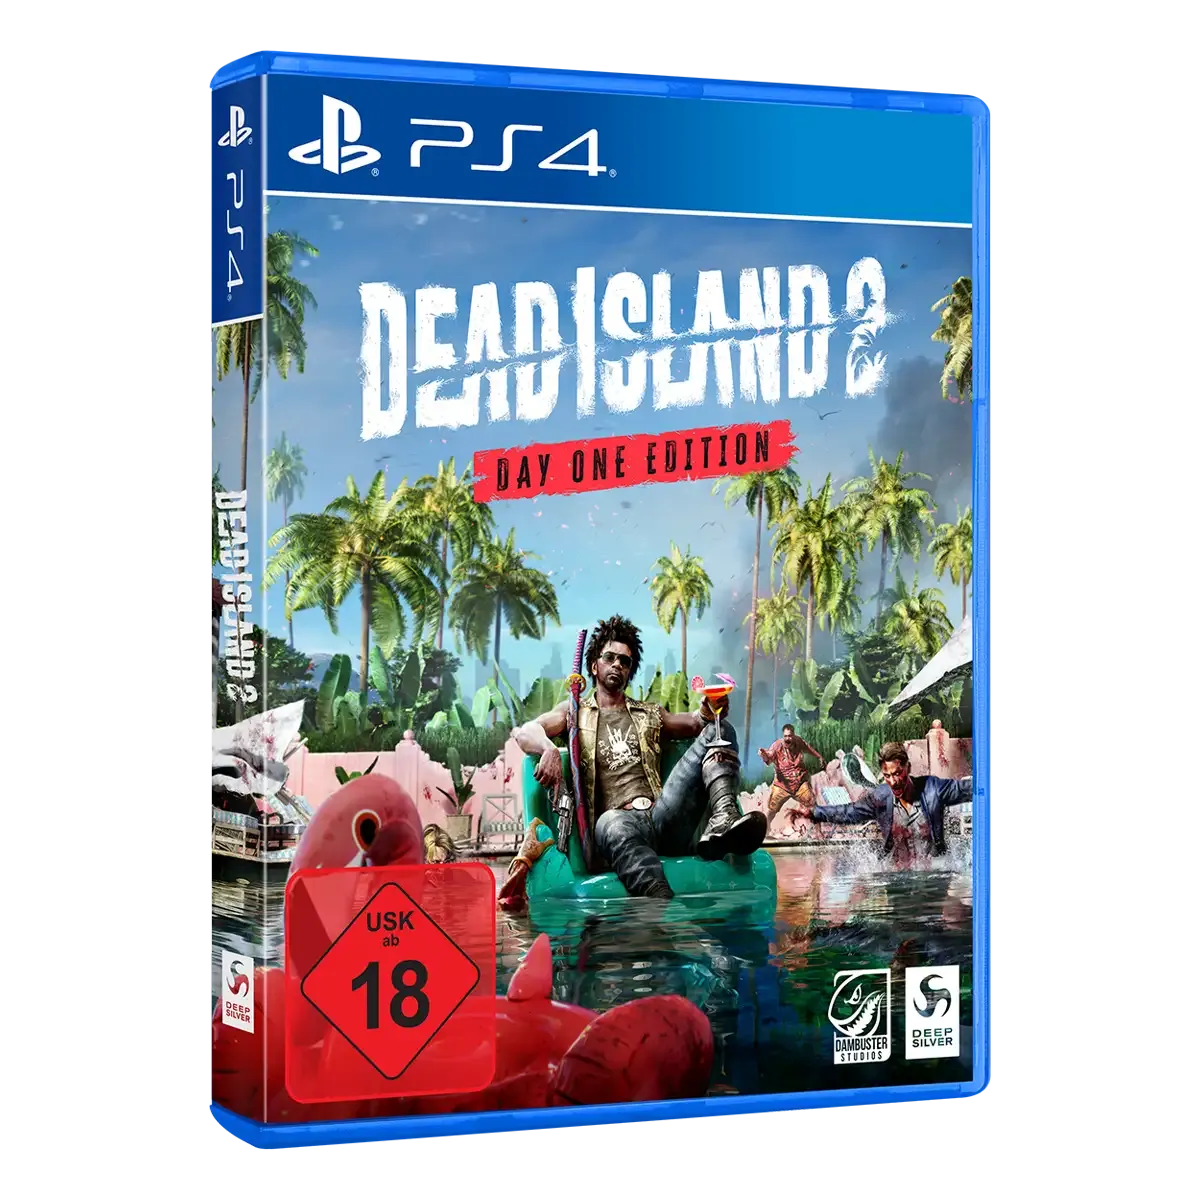 Dead Island 2 Day One Edition - PS4 (USK)